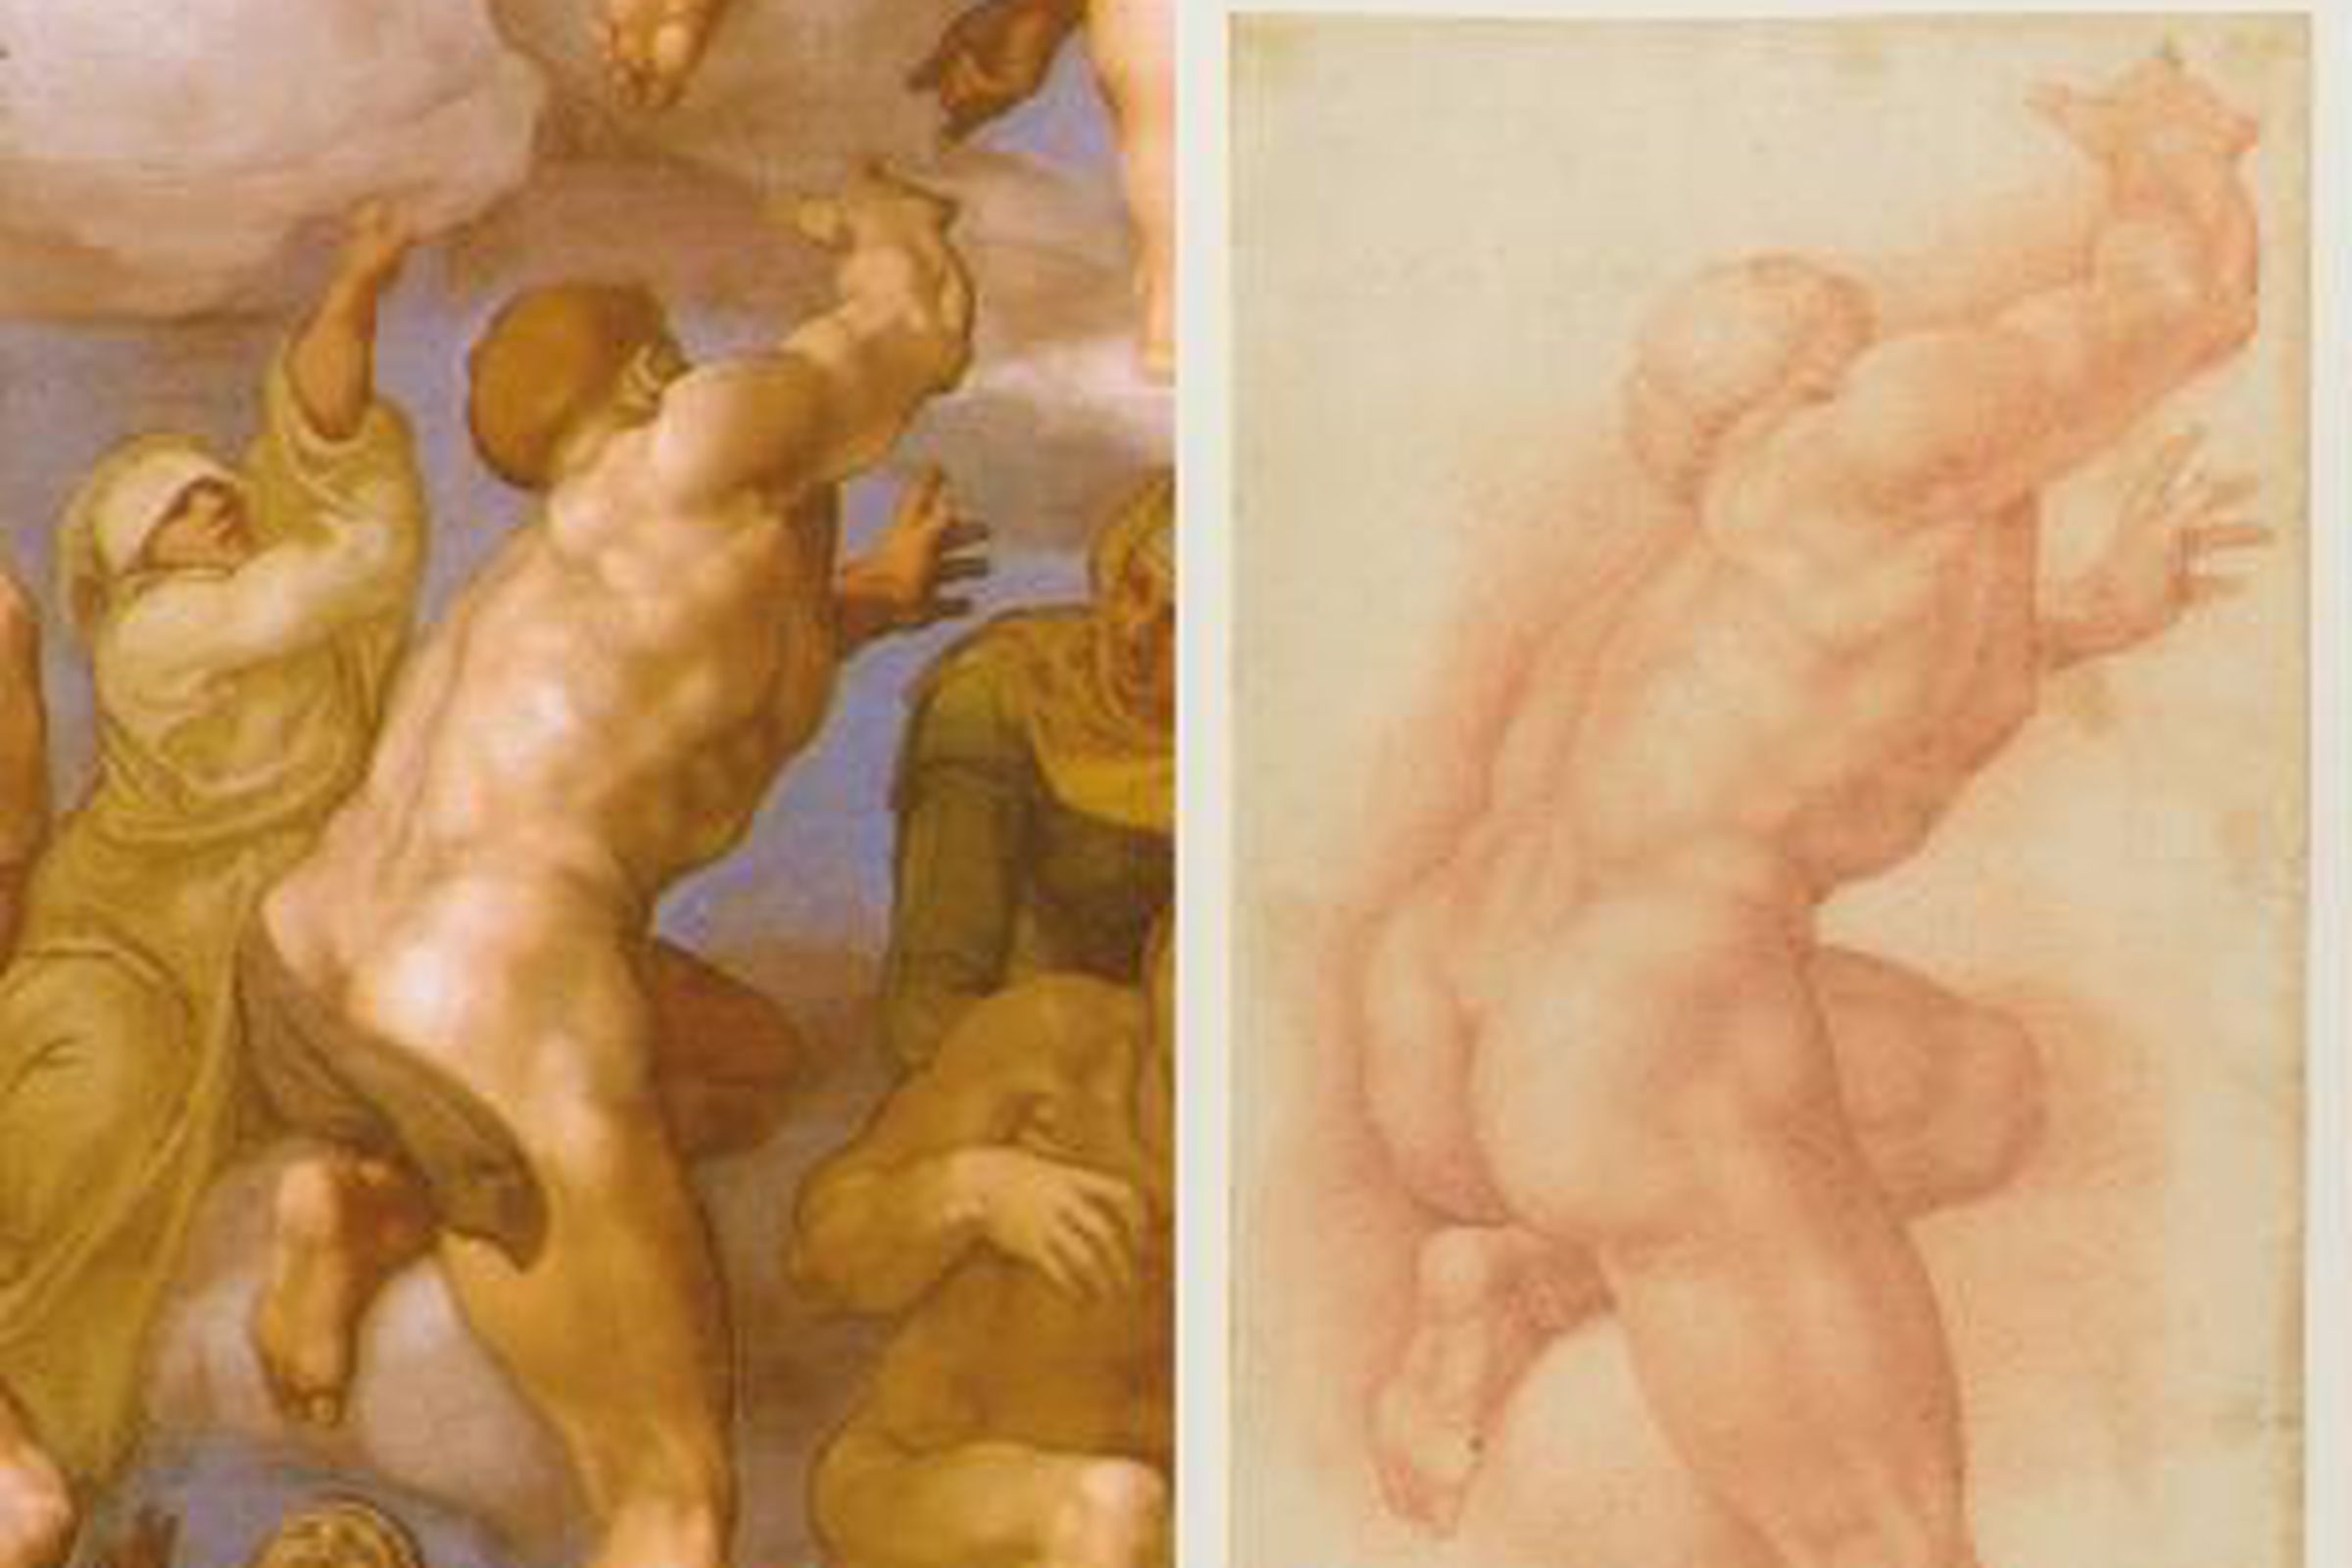 Detail from “Ascesa Dei Beati,” part of Michelangelo Buonarroti’s Sistine Chapel. On the right is a 16th century drawing reproducing the same detail. An inscription “di mano di Michelangelo” (from Michelangelo’s hand), on the bottom-left side of the drawing, was hidden by a tape and revealed after restoration.